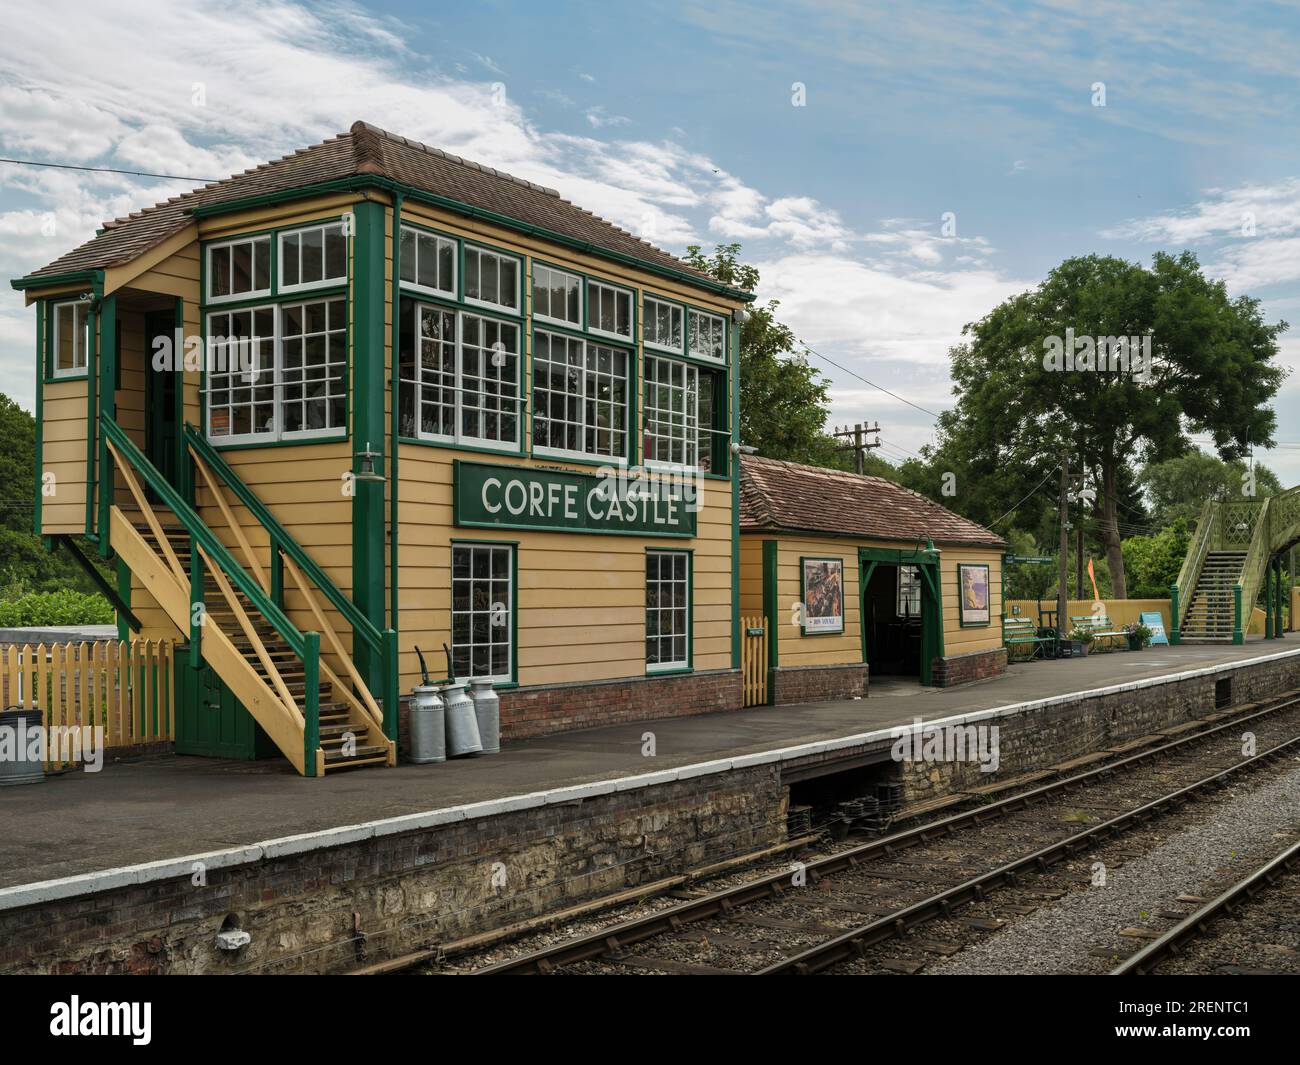 Corfe Castle Railway Station. The award winning Swanage Railway Company is volunteer-led and runs between Wareham and Swanage, covering ten miles of r Stock Photo